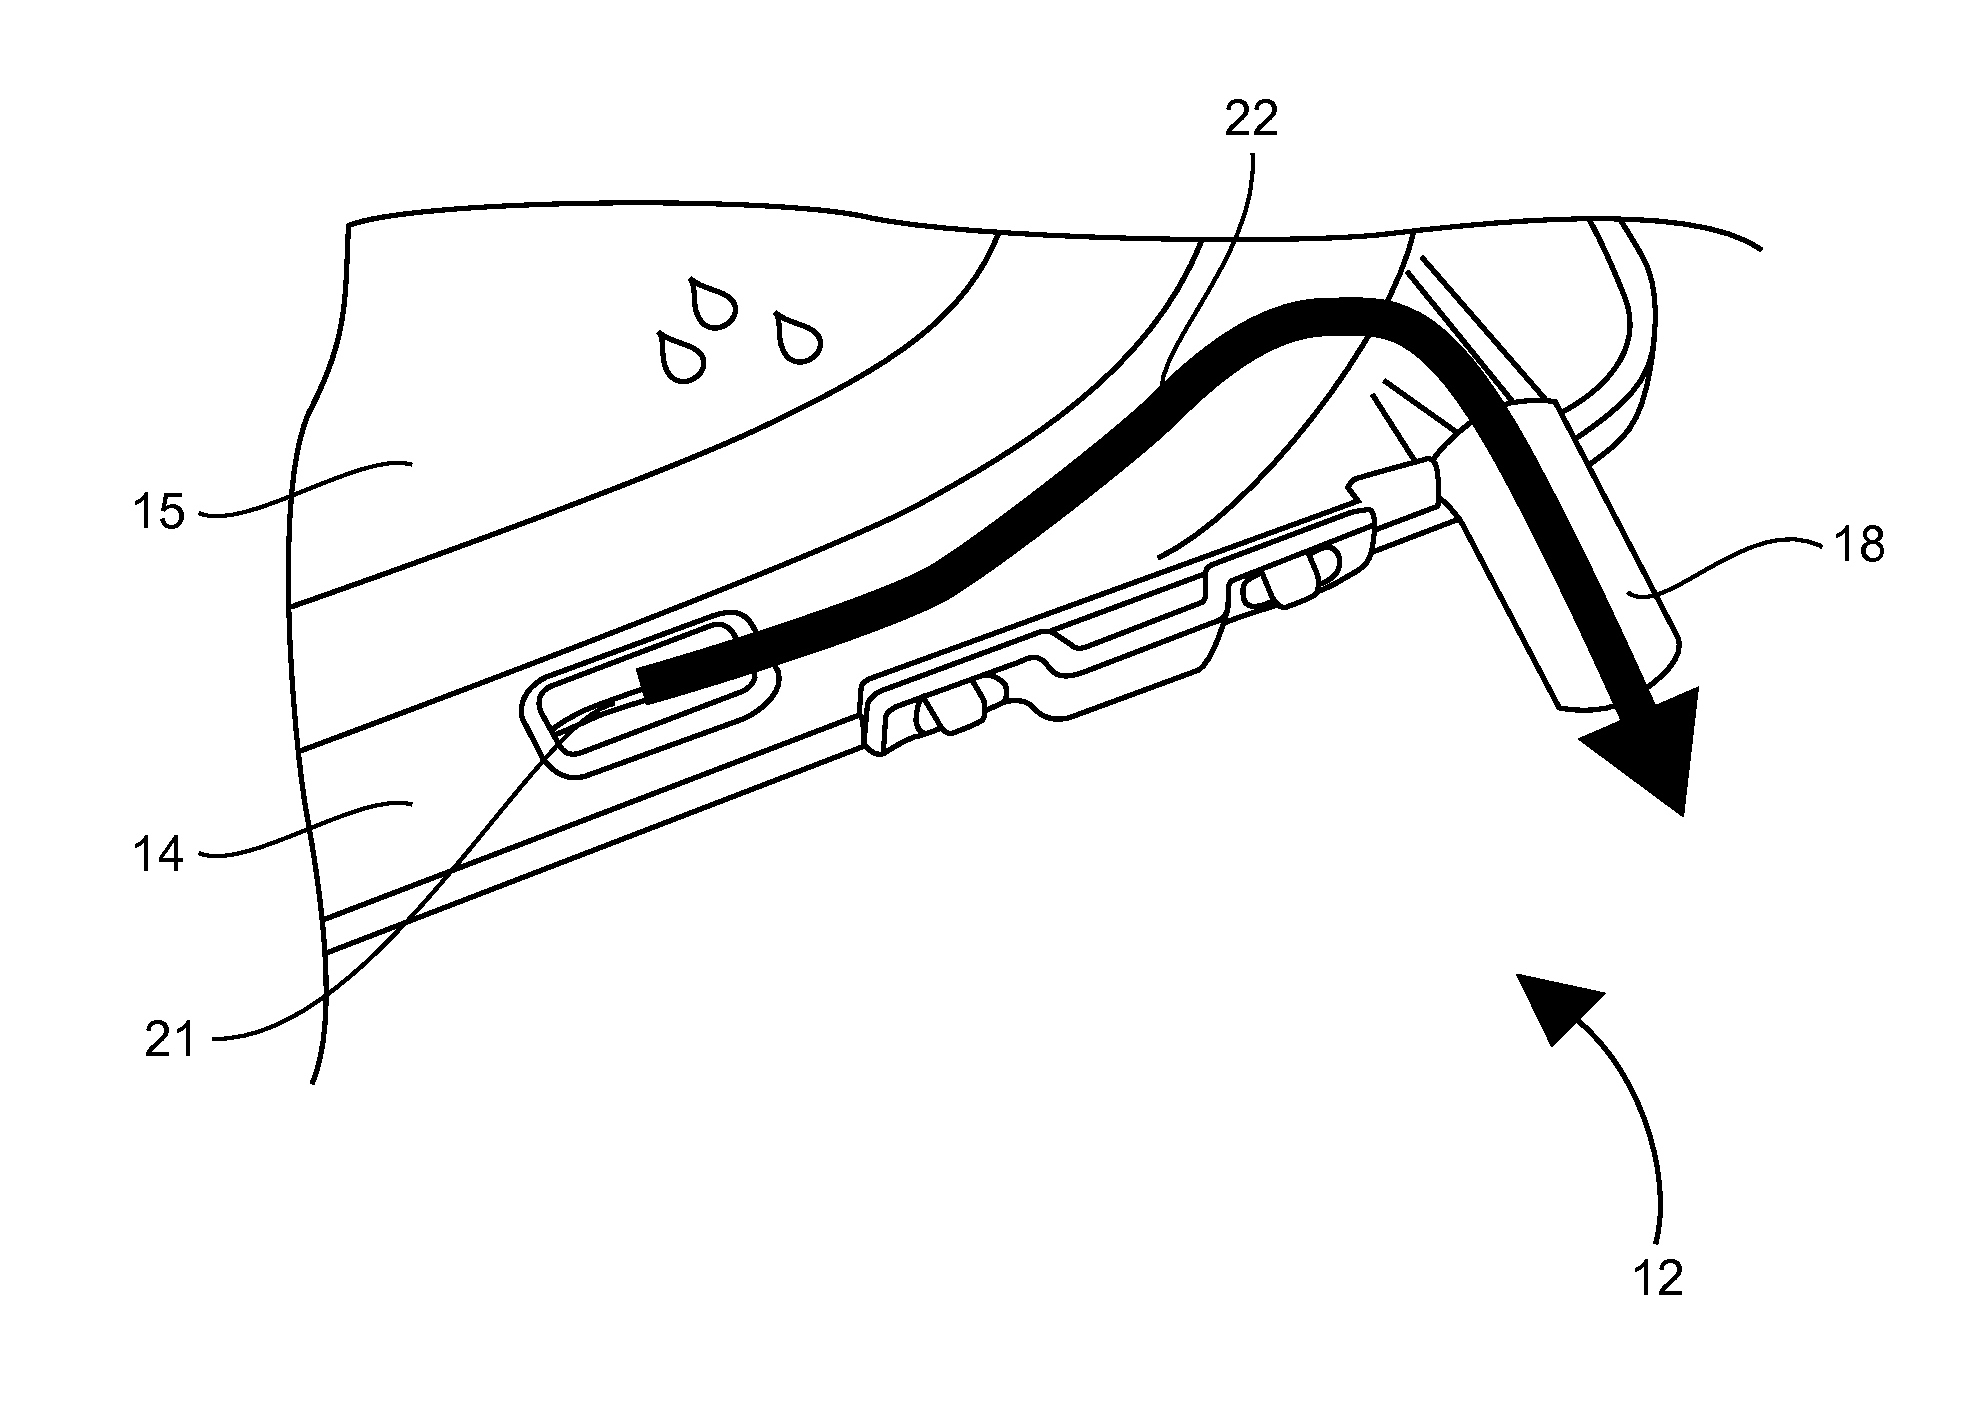 Device for closing off an opening prepared in the roof of a vehicle, provided with a sealing barrier and a drain for draining water towards the exterior